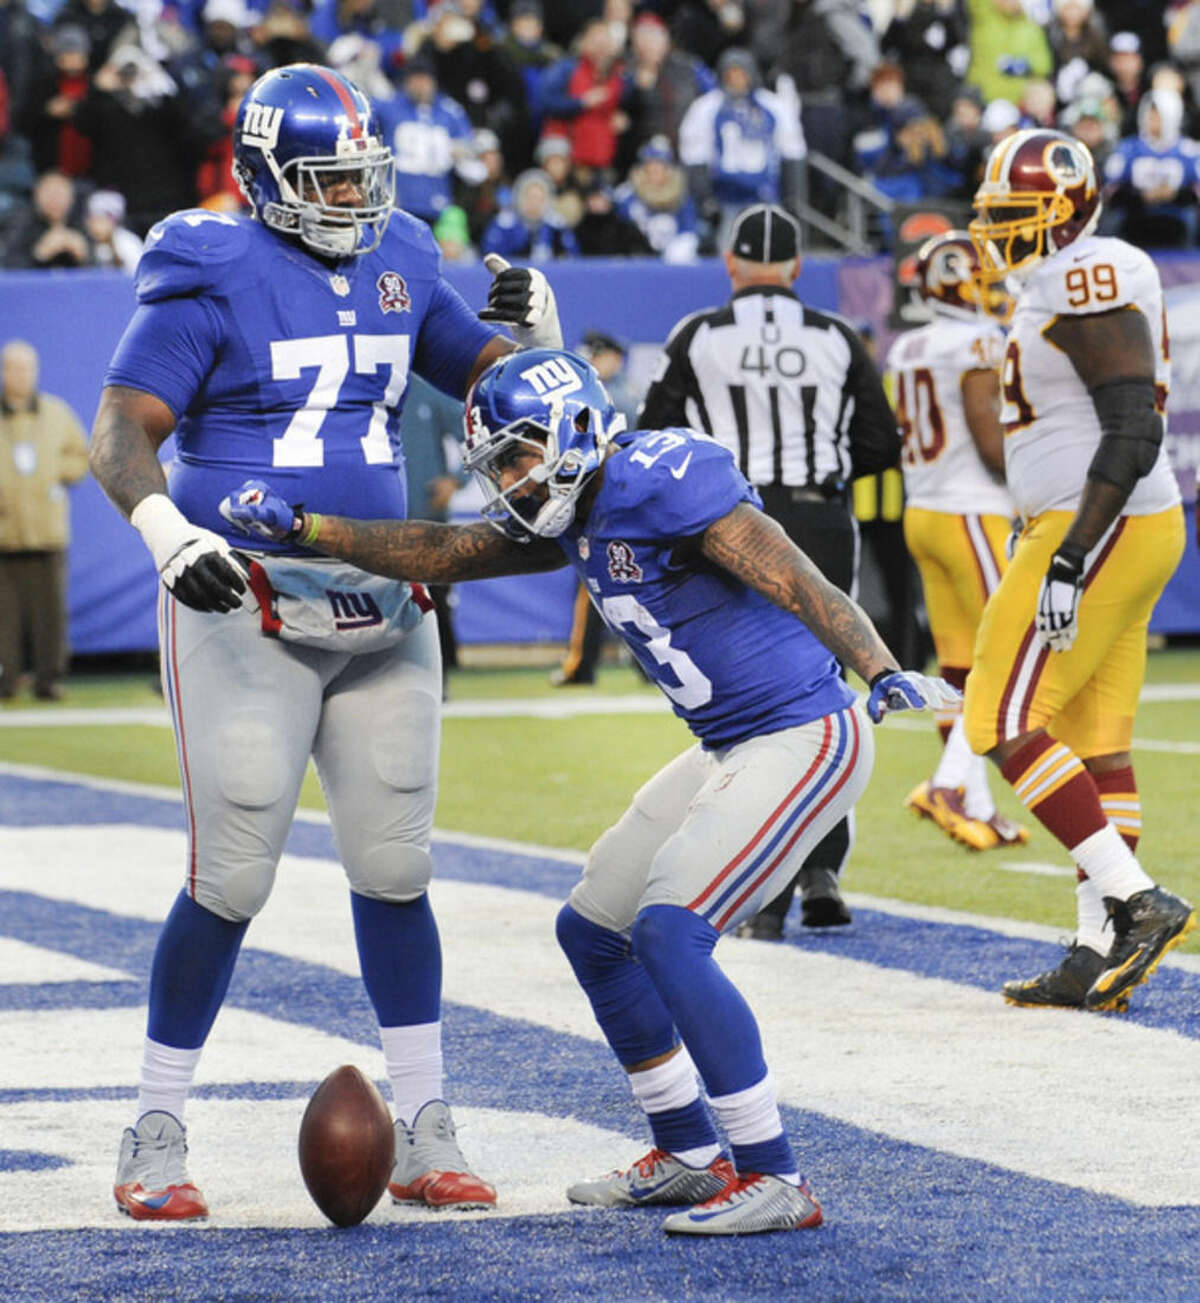 New York Giants wide receiver Odell Beckham Jr. (13) reacts with guard John Jerry (77) after scoring a touchdown against the Washington Redskins during the fourth quarter of an NFL football game, Sunday, Dec. 14, 2014, in East Rutherford, N.J. (AP Photo/Bill Kostroun)